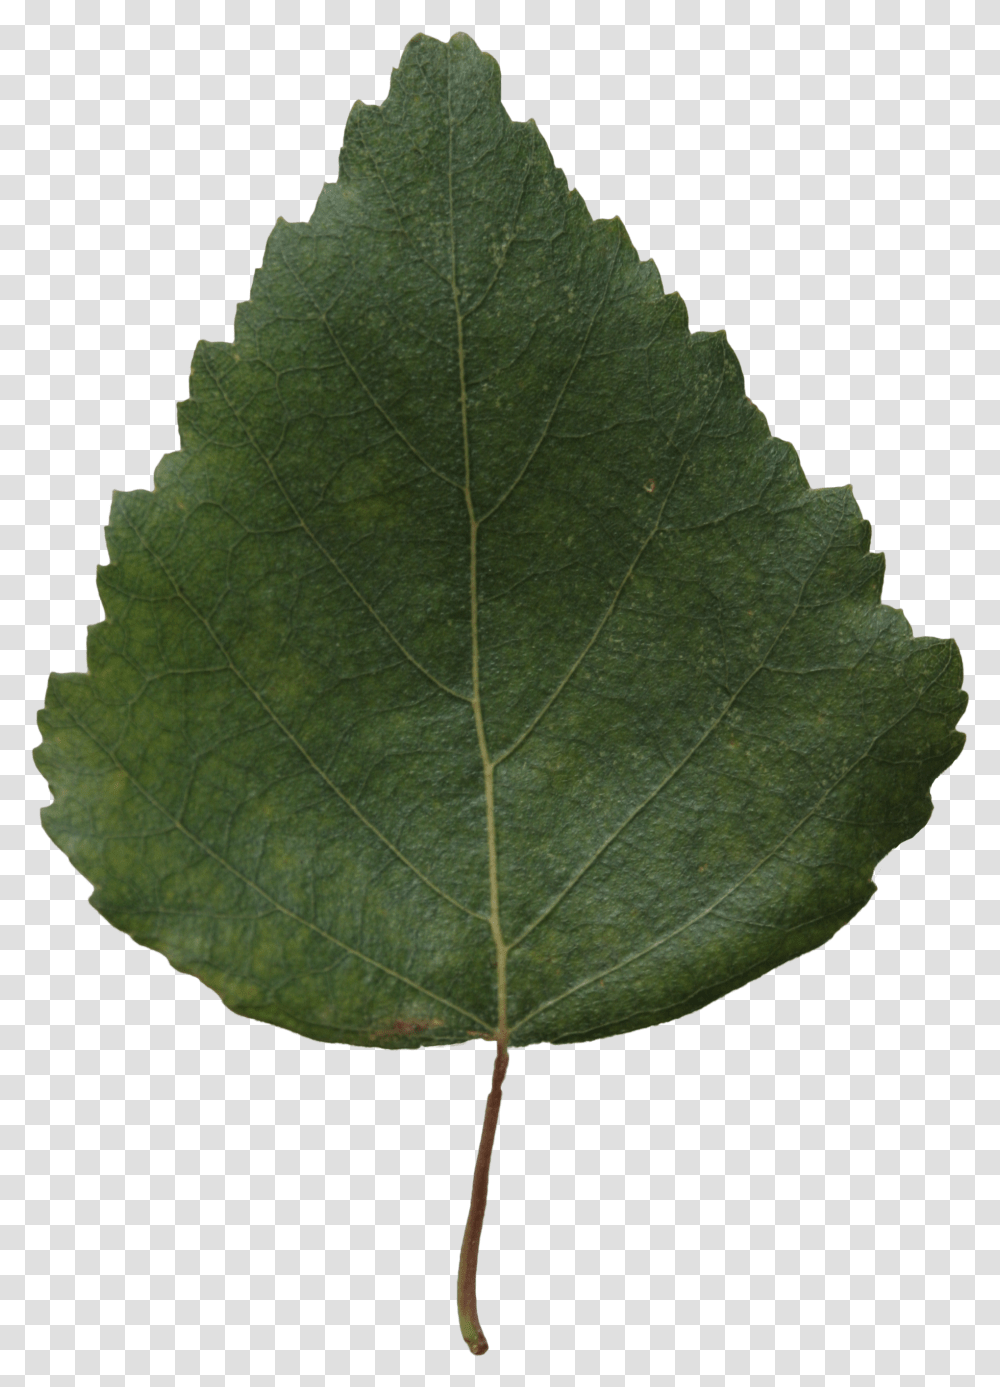 Small Green Leaf Texture - Birch Free Cut Out People Transparent Png